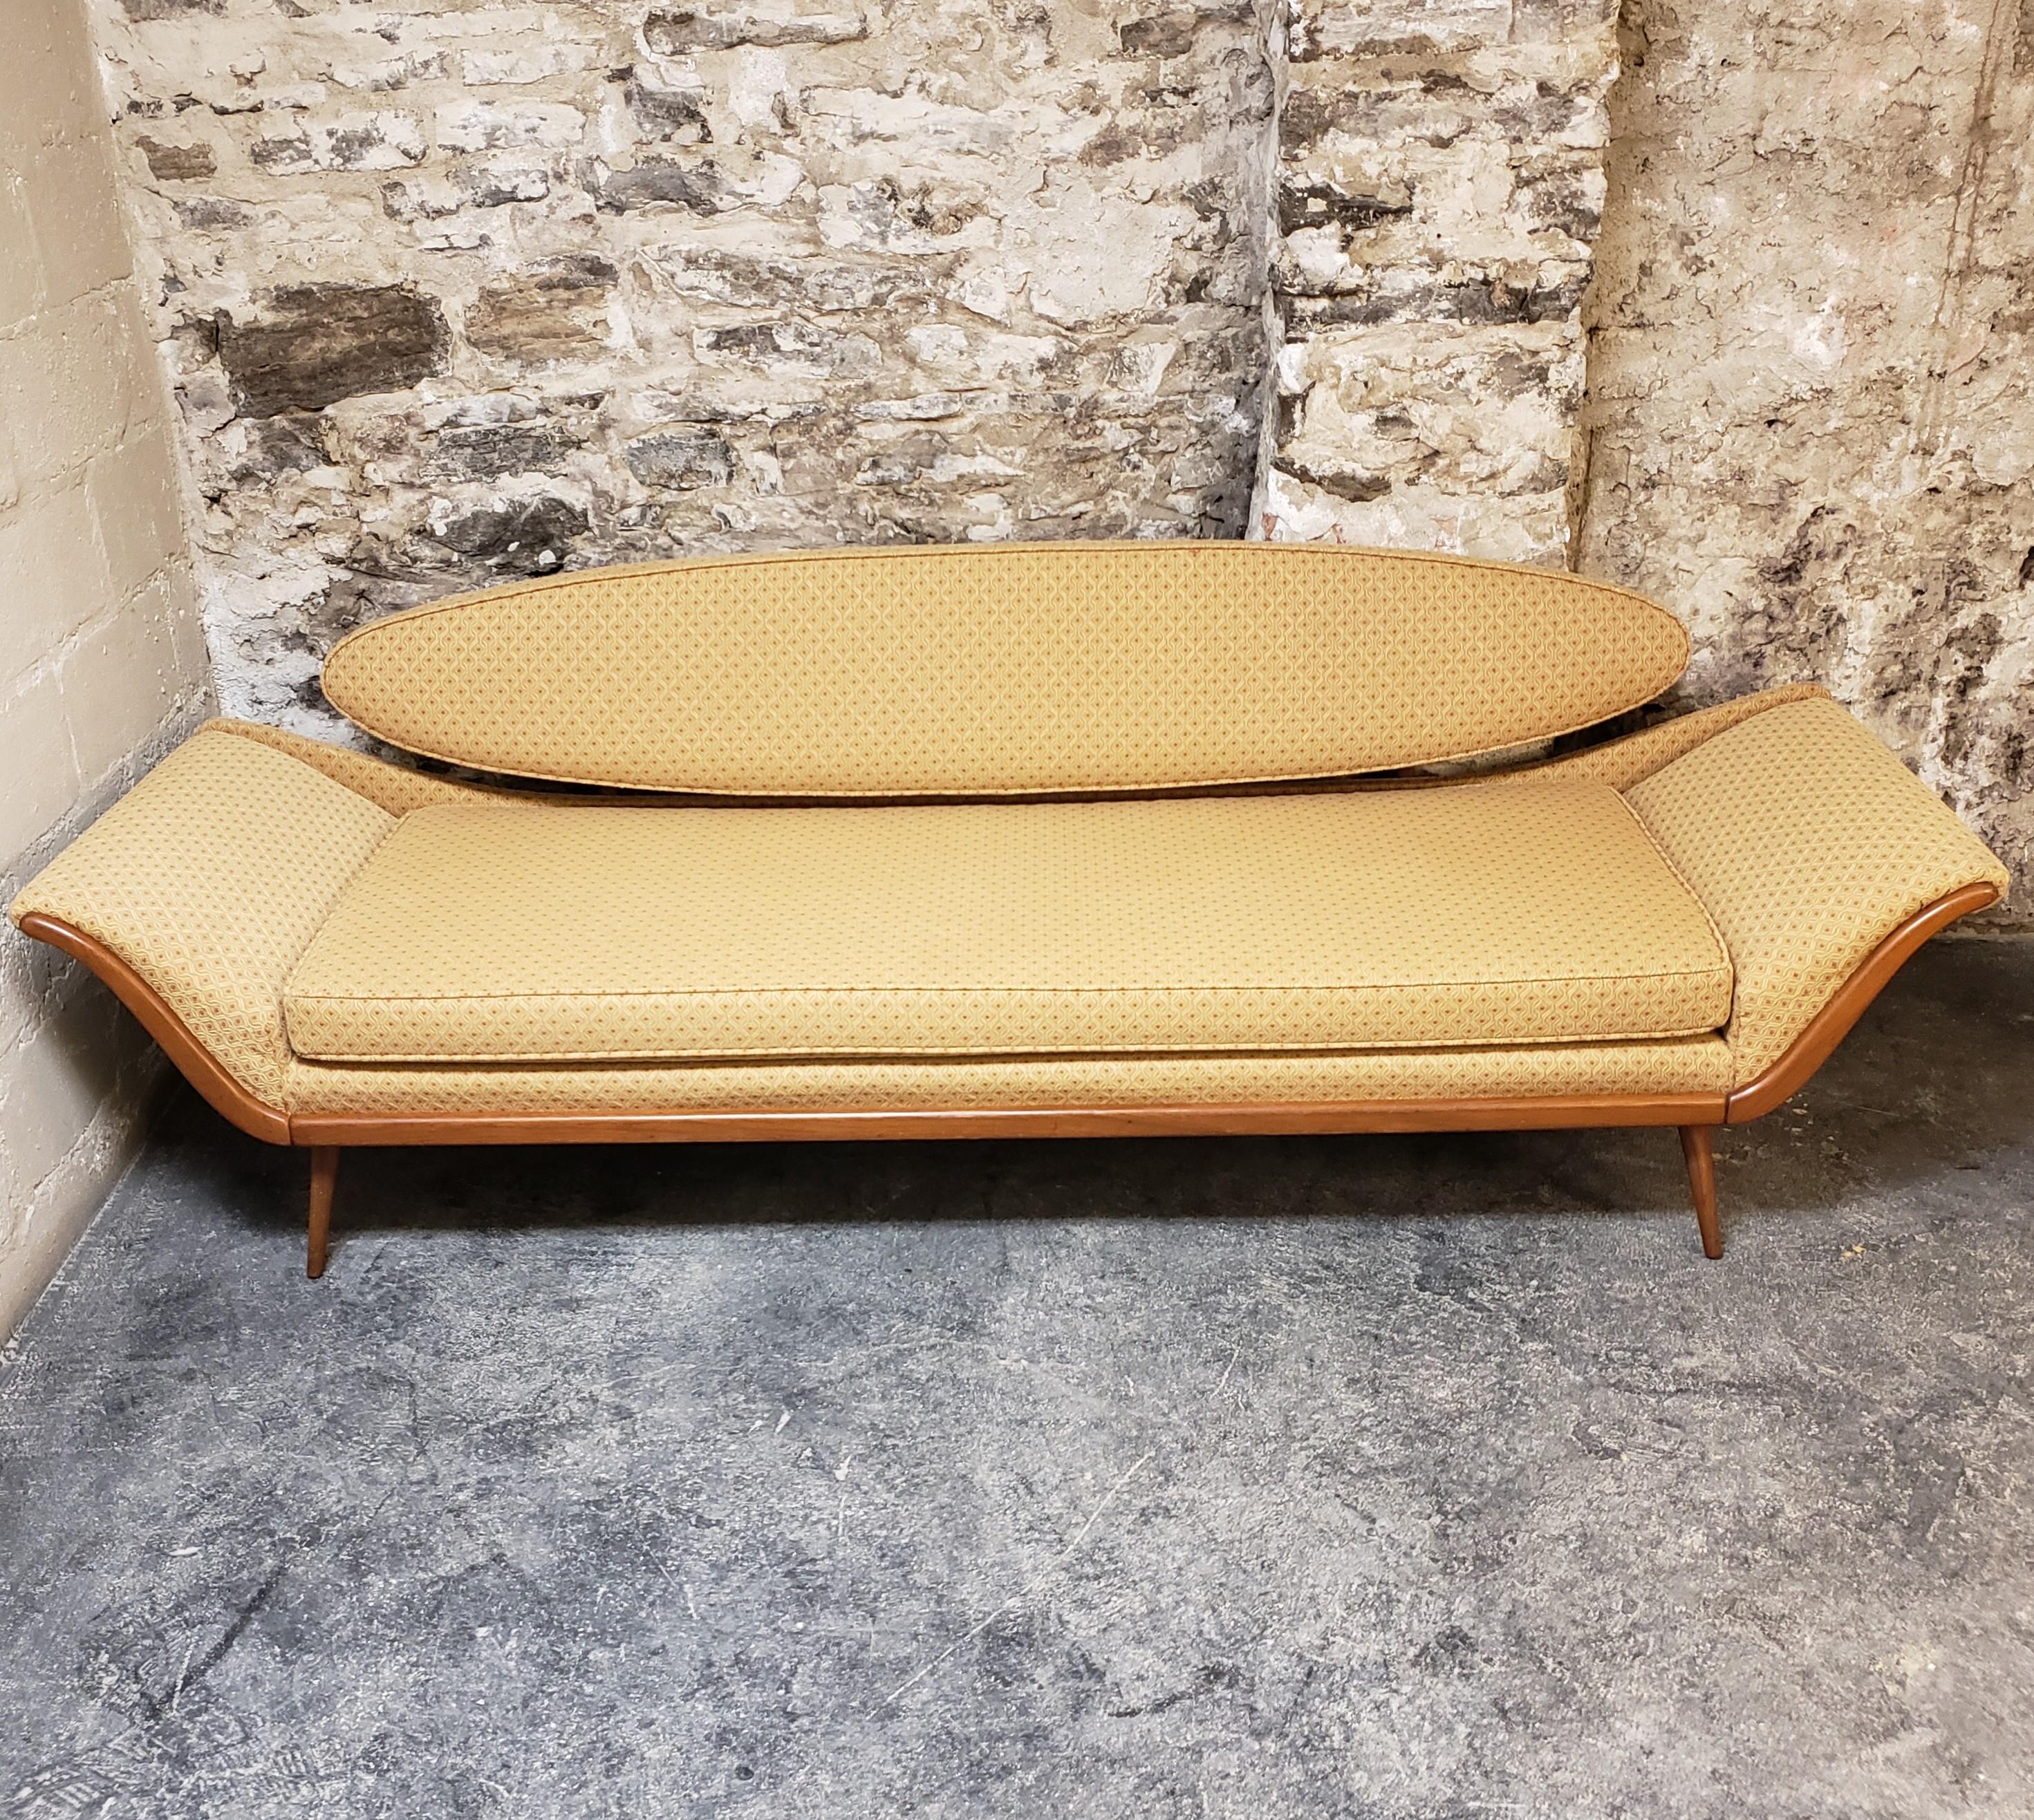 This rare gondola style sofa and chair set was designed by Luigi Tiengo and produced by the Canadian manufacturer Cimon in the 1960s. The sculptural shape of the elongated arms, the atomic shaped back and the slightly inclined position of the seats